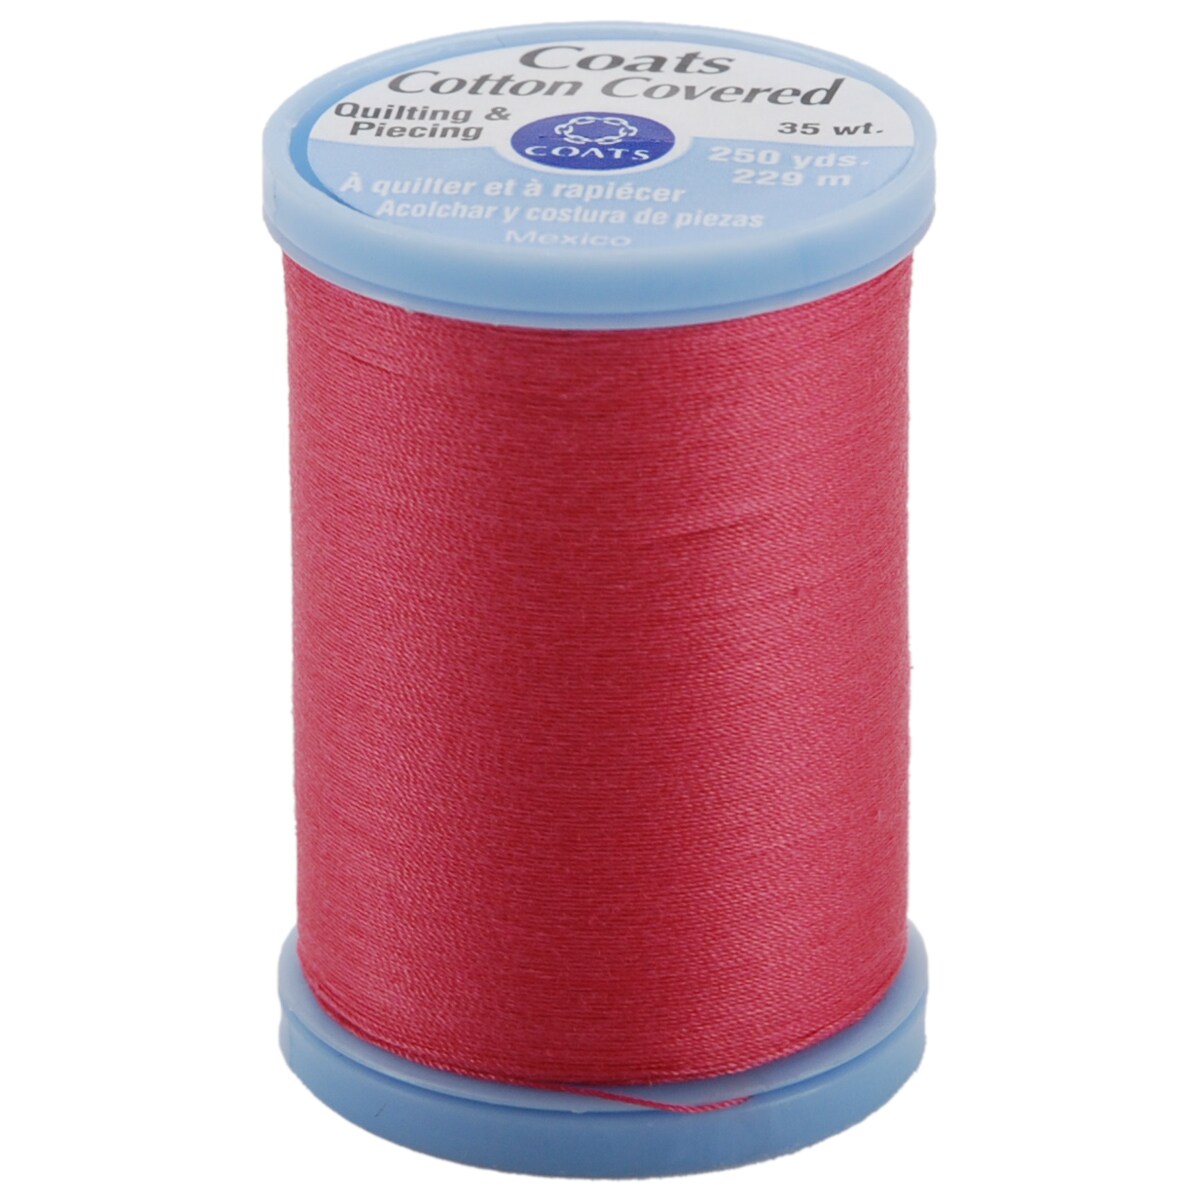 Coats Cotton Covered Quilting & Piecing Thread 250Yd-Hot Pink | Michaels